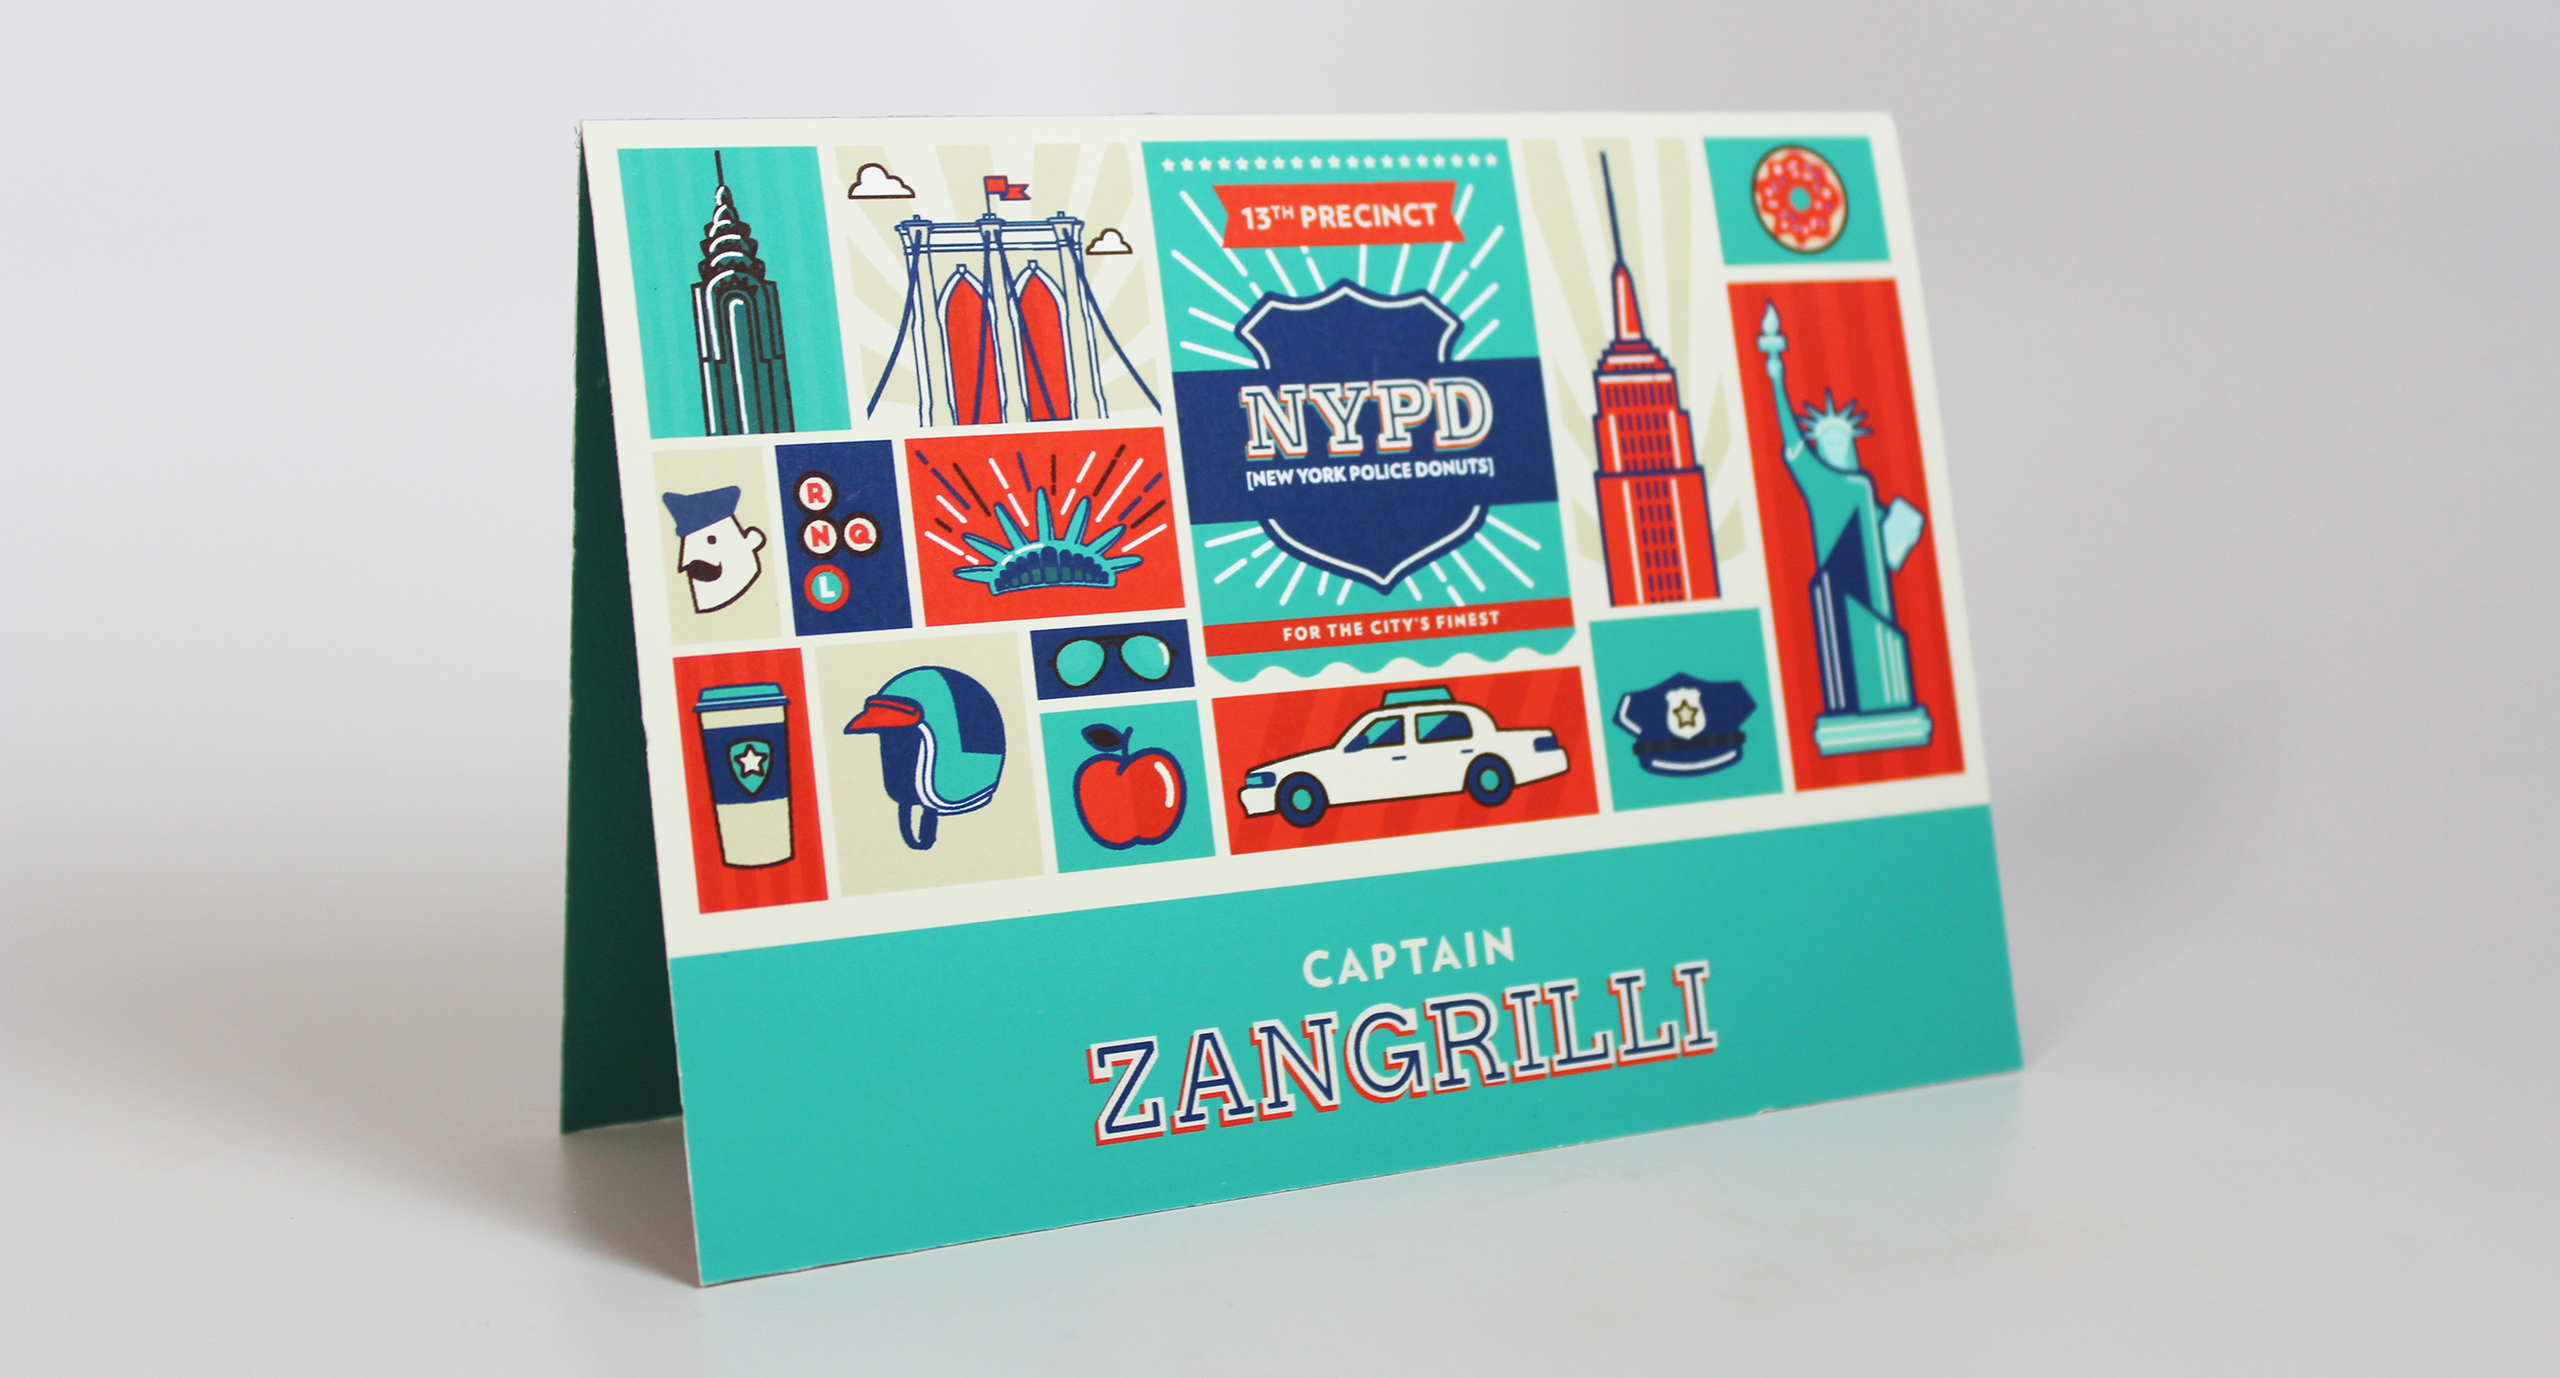 A colorful post card depicting New York landmarks as well as the NYPD logo and items. On it there is a text: Captain Zangrilli.